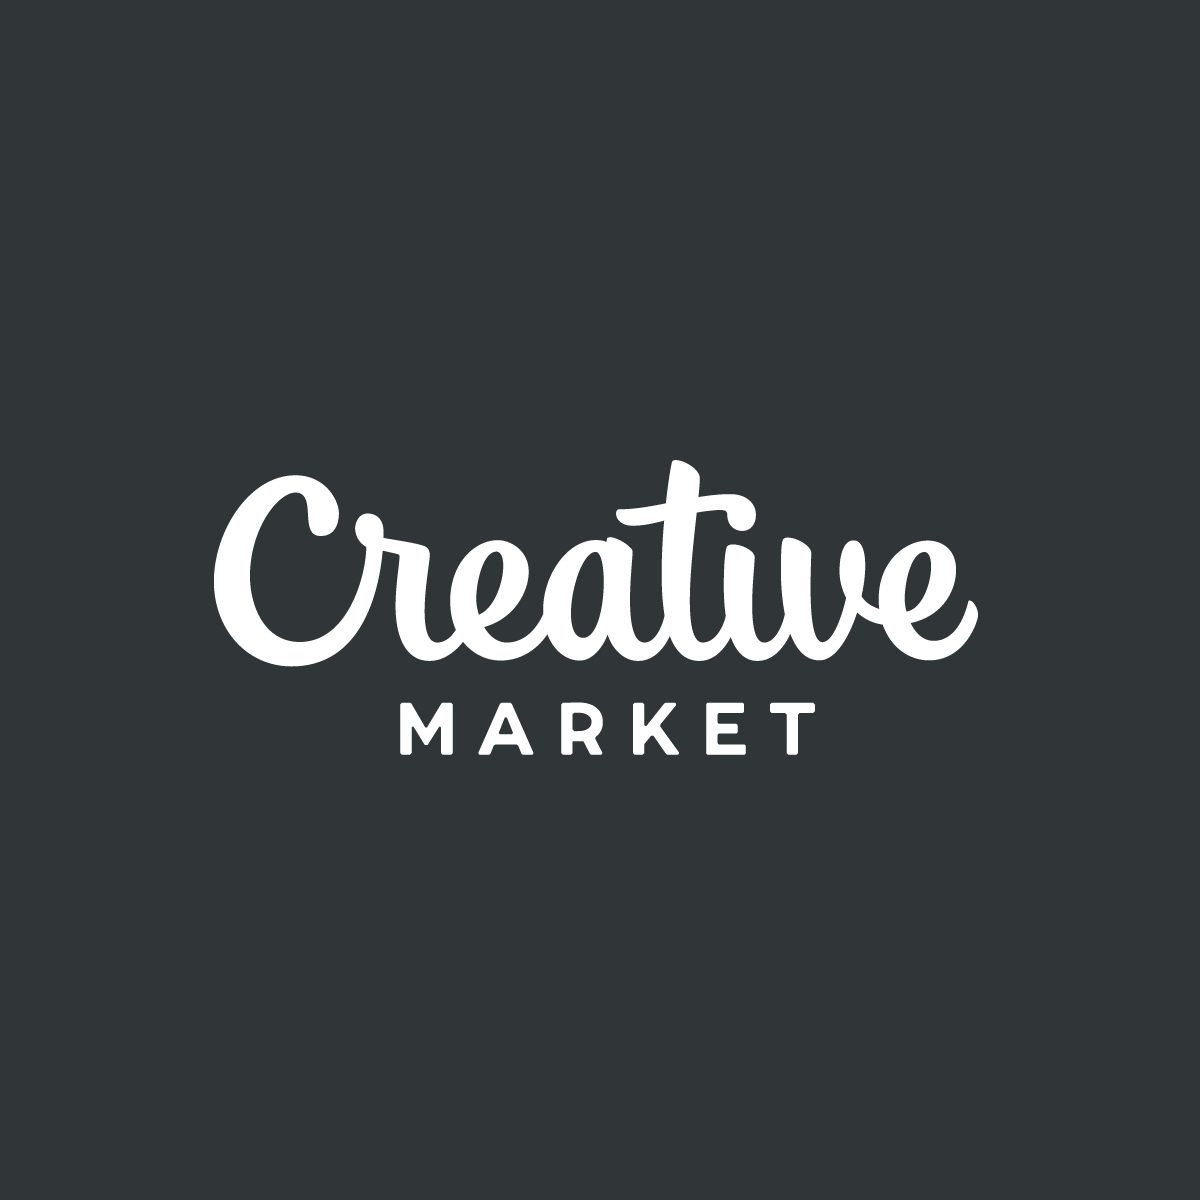 Download Free Fonts Graphics Themes And More Creative Market SVG Cut Files